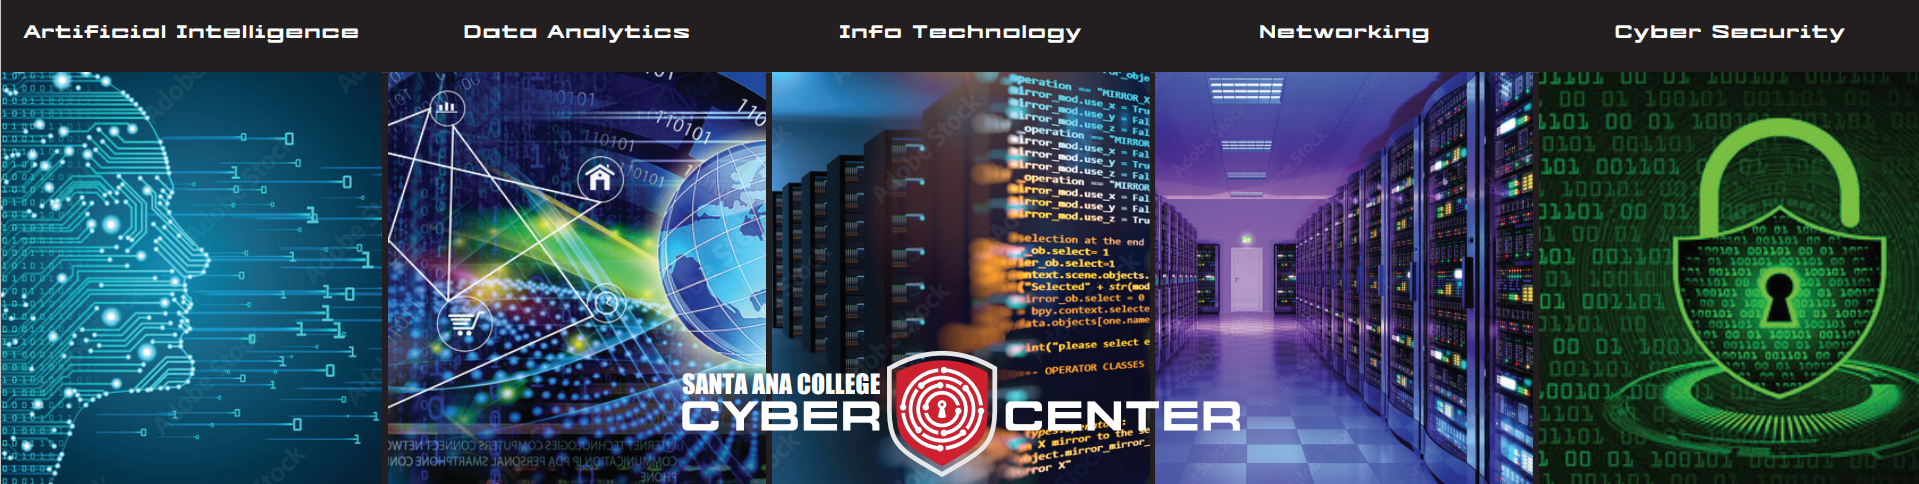 SAC Cyber Center.PNG